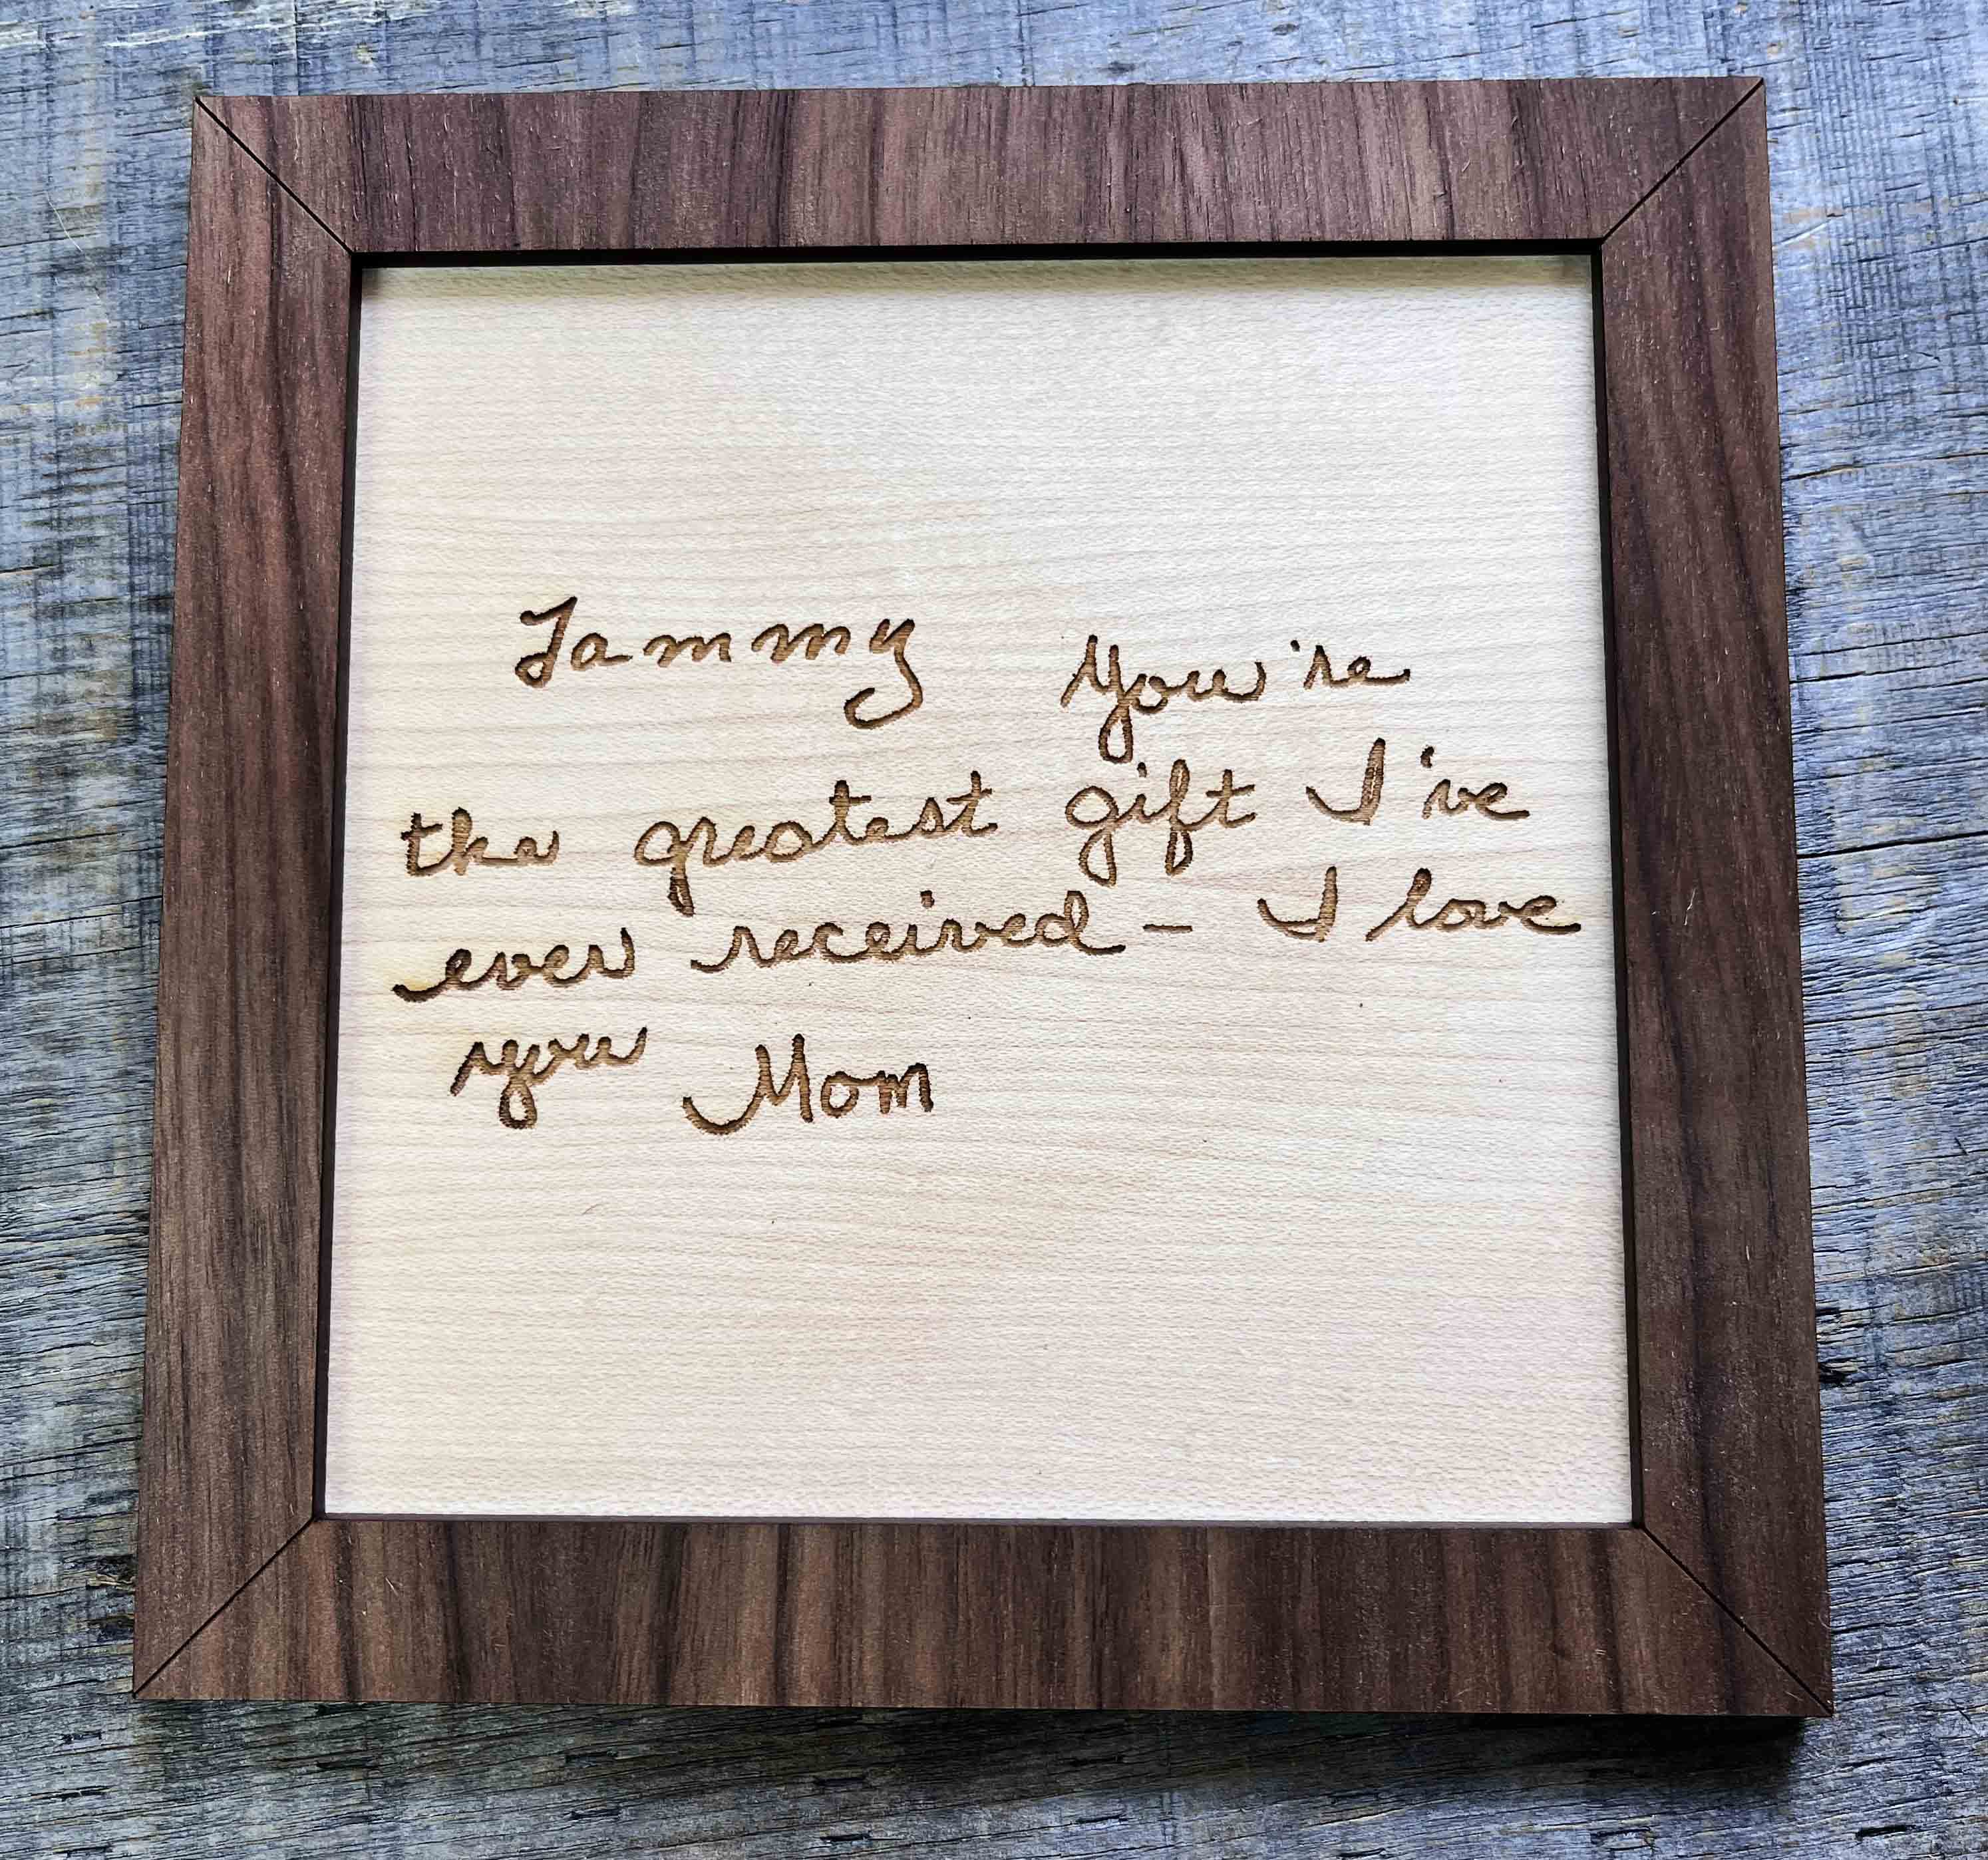 Handwriting engraved into Wood Sign.